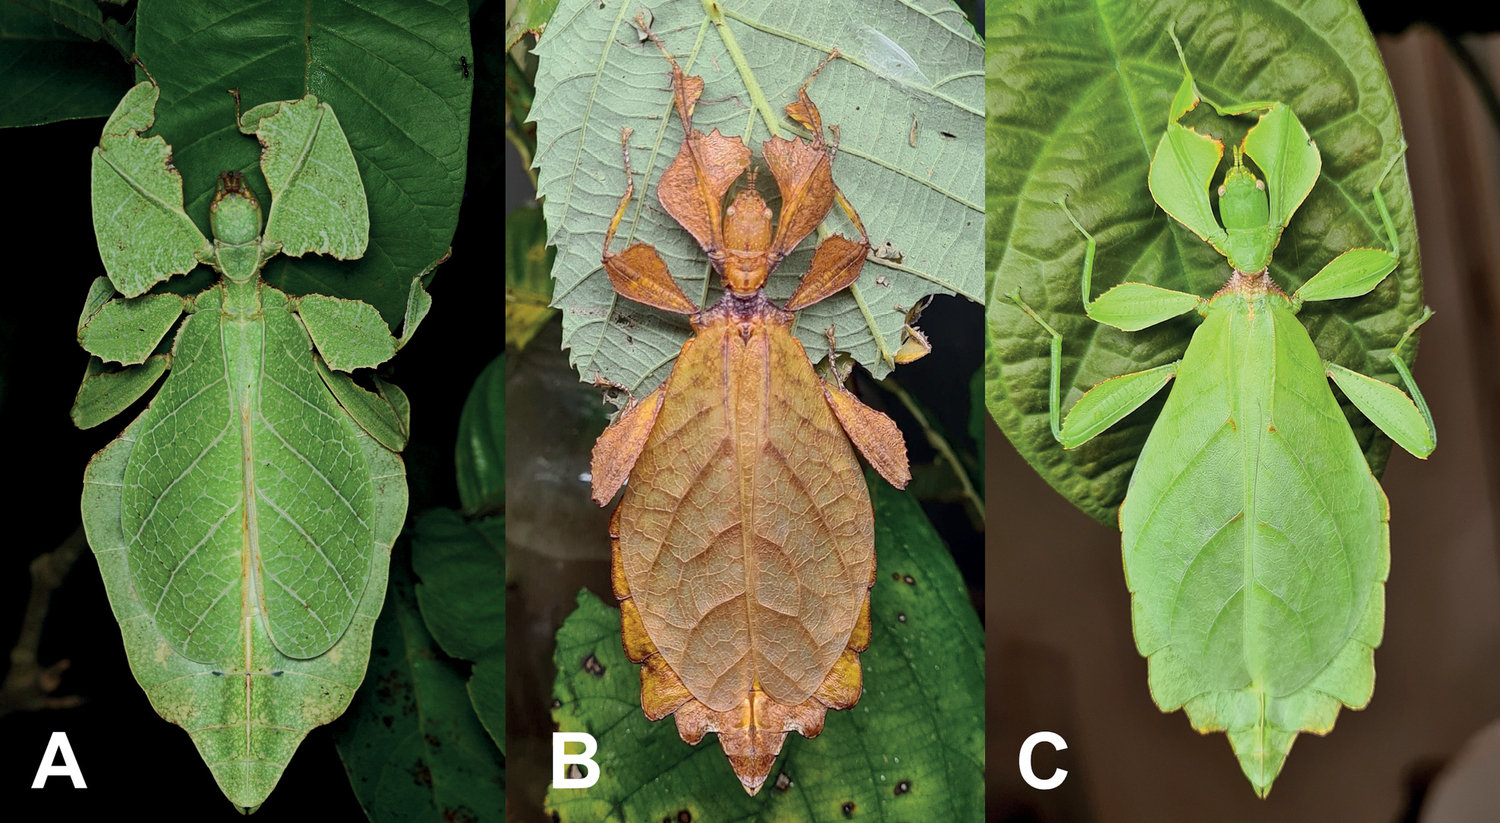 Appearances can be deceptive: the appearance of leaf insects does not necessarily reflect their species affiliation. While Pulchriphyllium anangu (A) is a new, distinct species from India, the other two individuals (B and C) both belong to the newly described Philippine species Phyllium ortizi, despite their external differences.